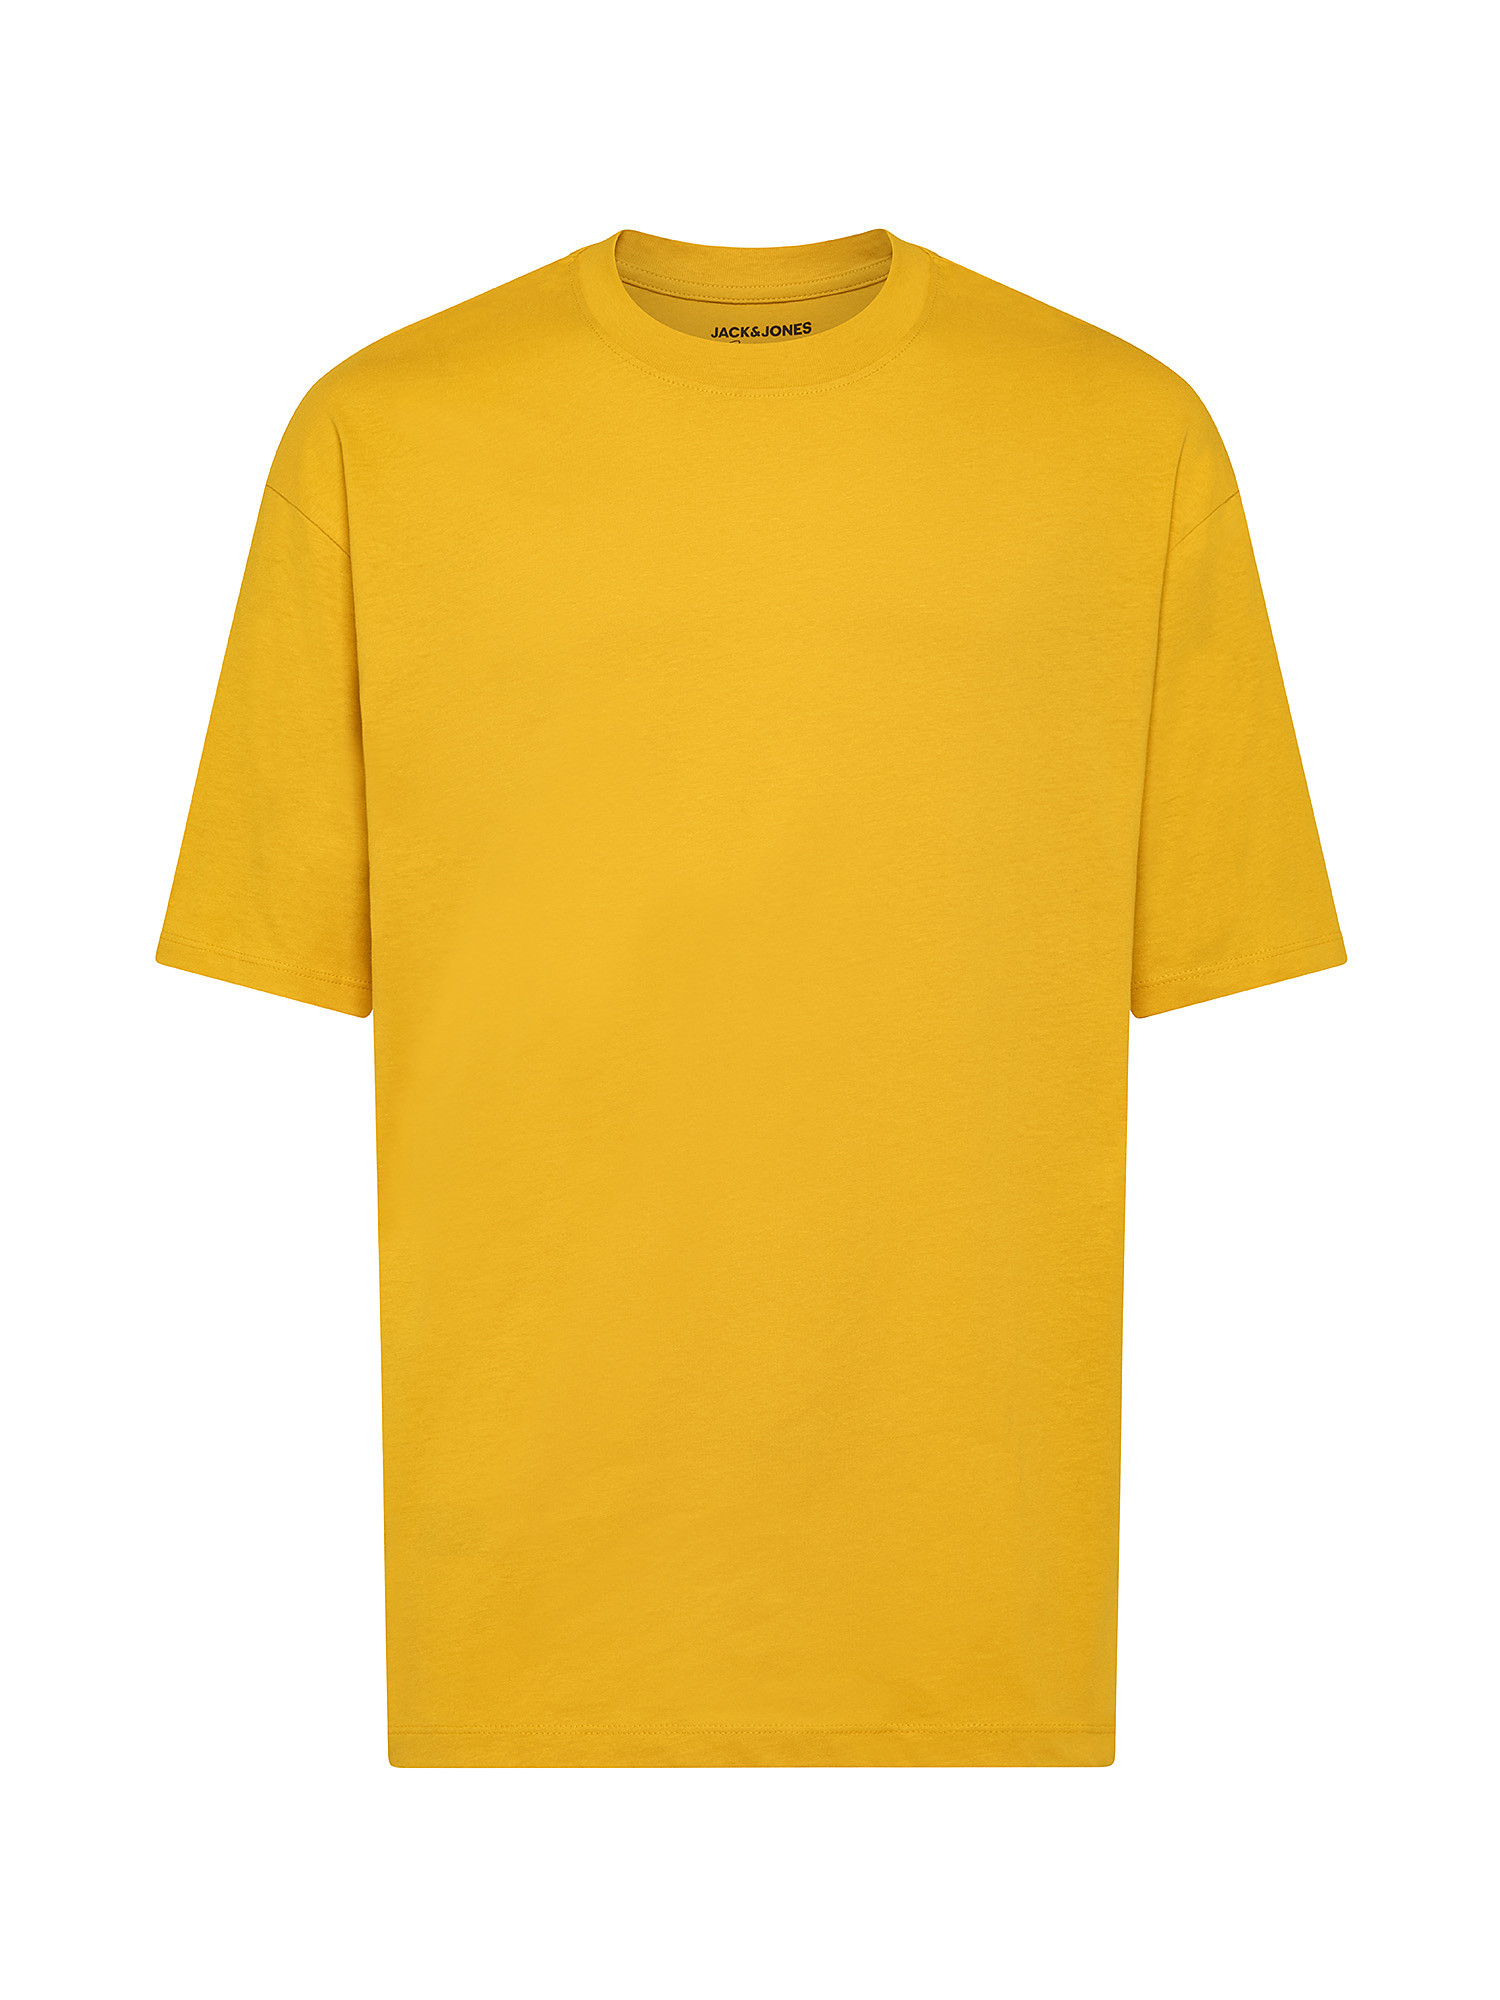 T-shirt in 100% cotton, Yellow, large image number 0